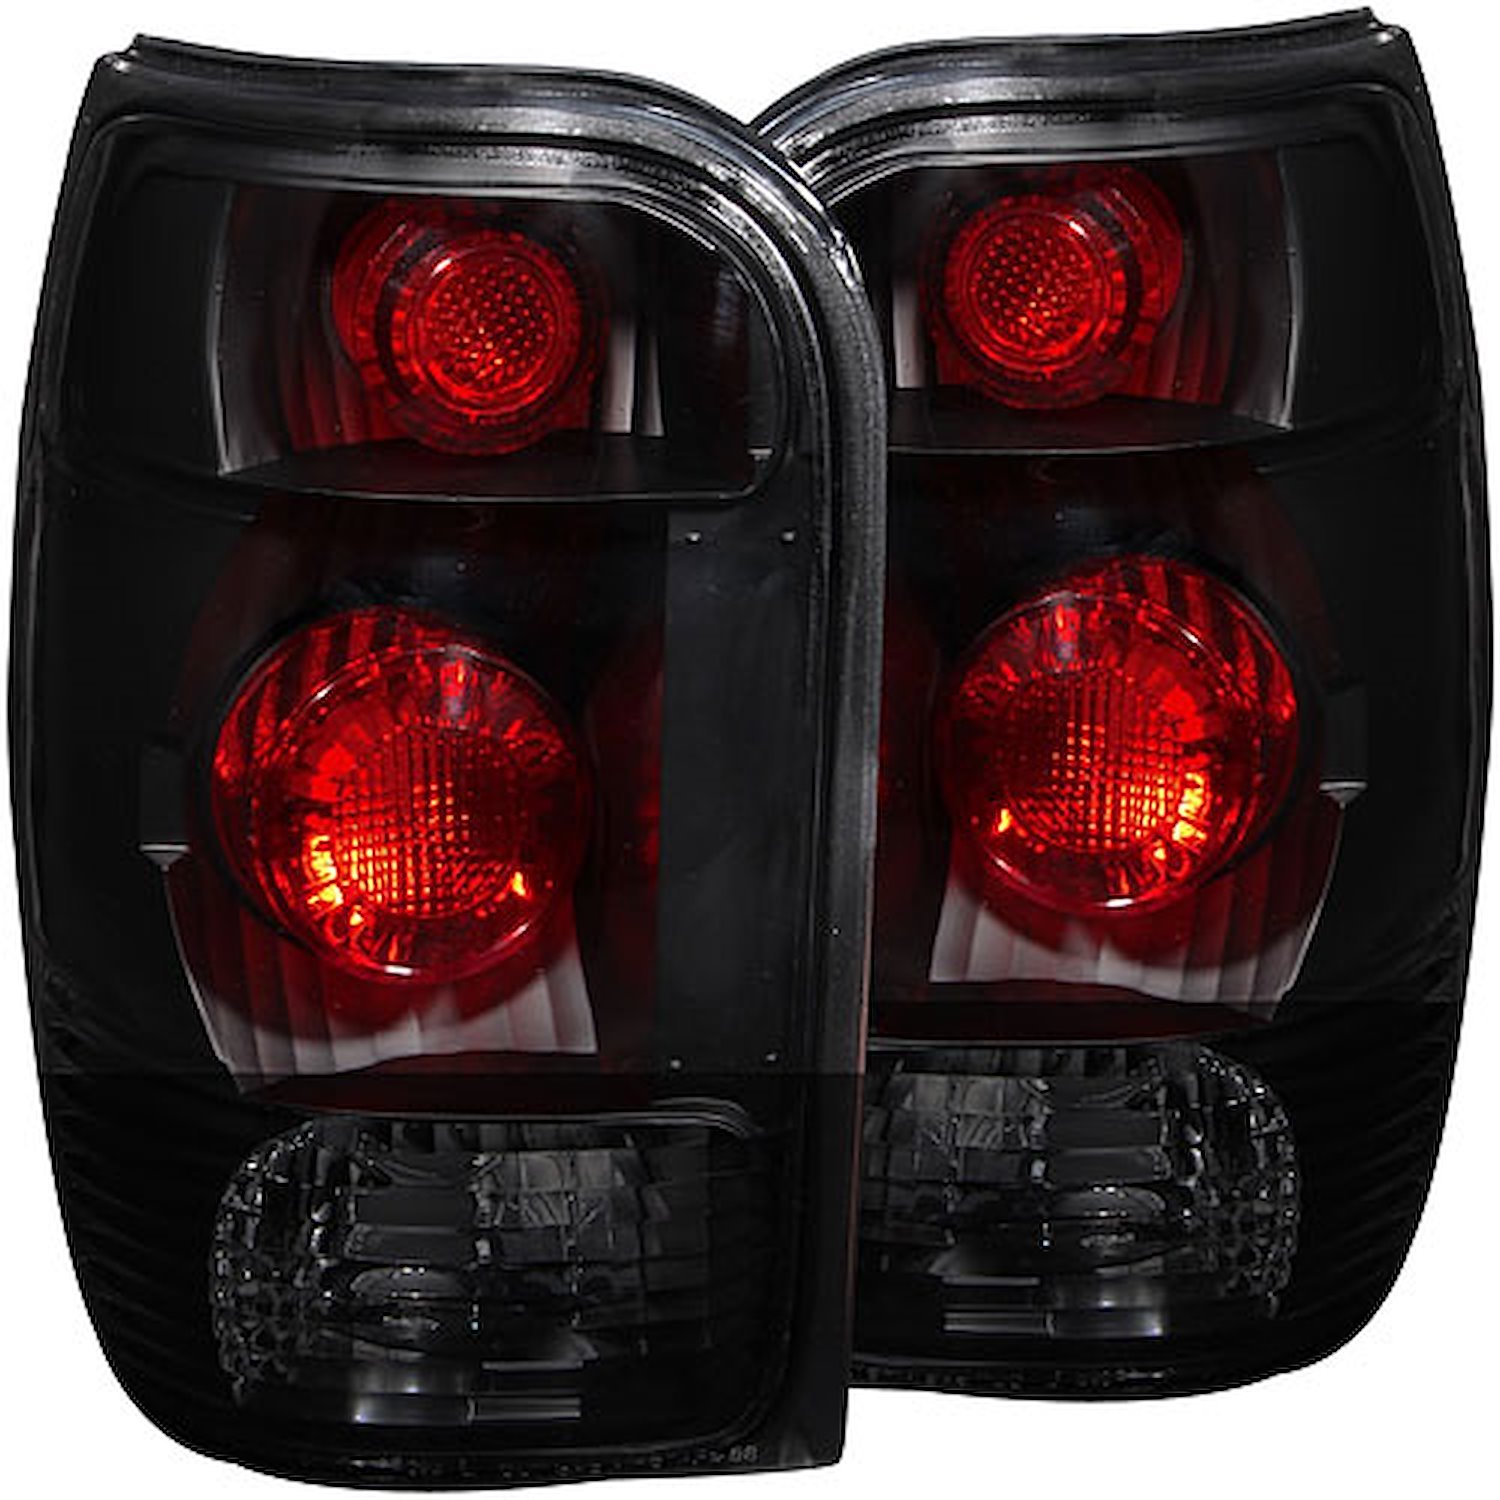 1998-2001 Ford Explorer Taillights